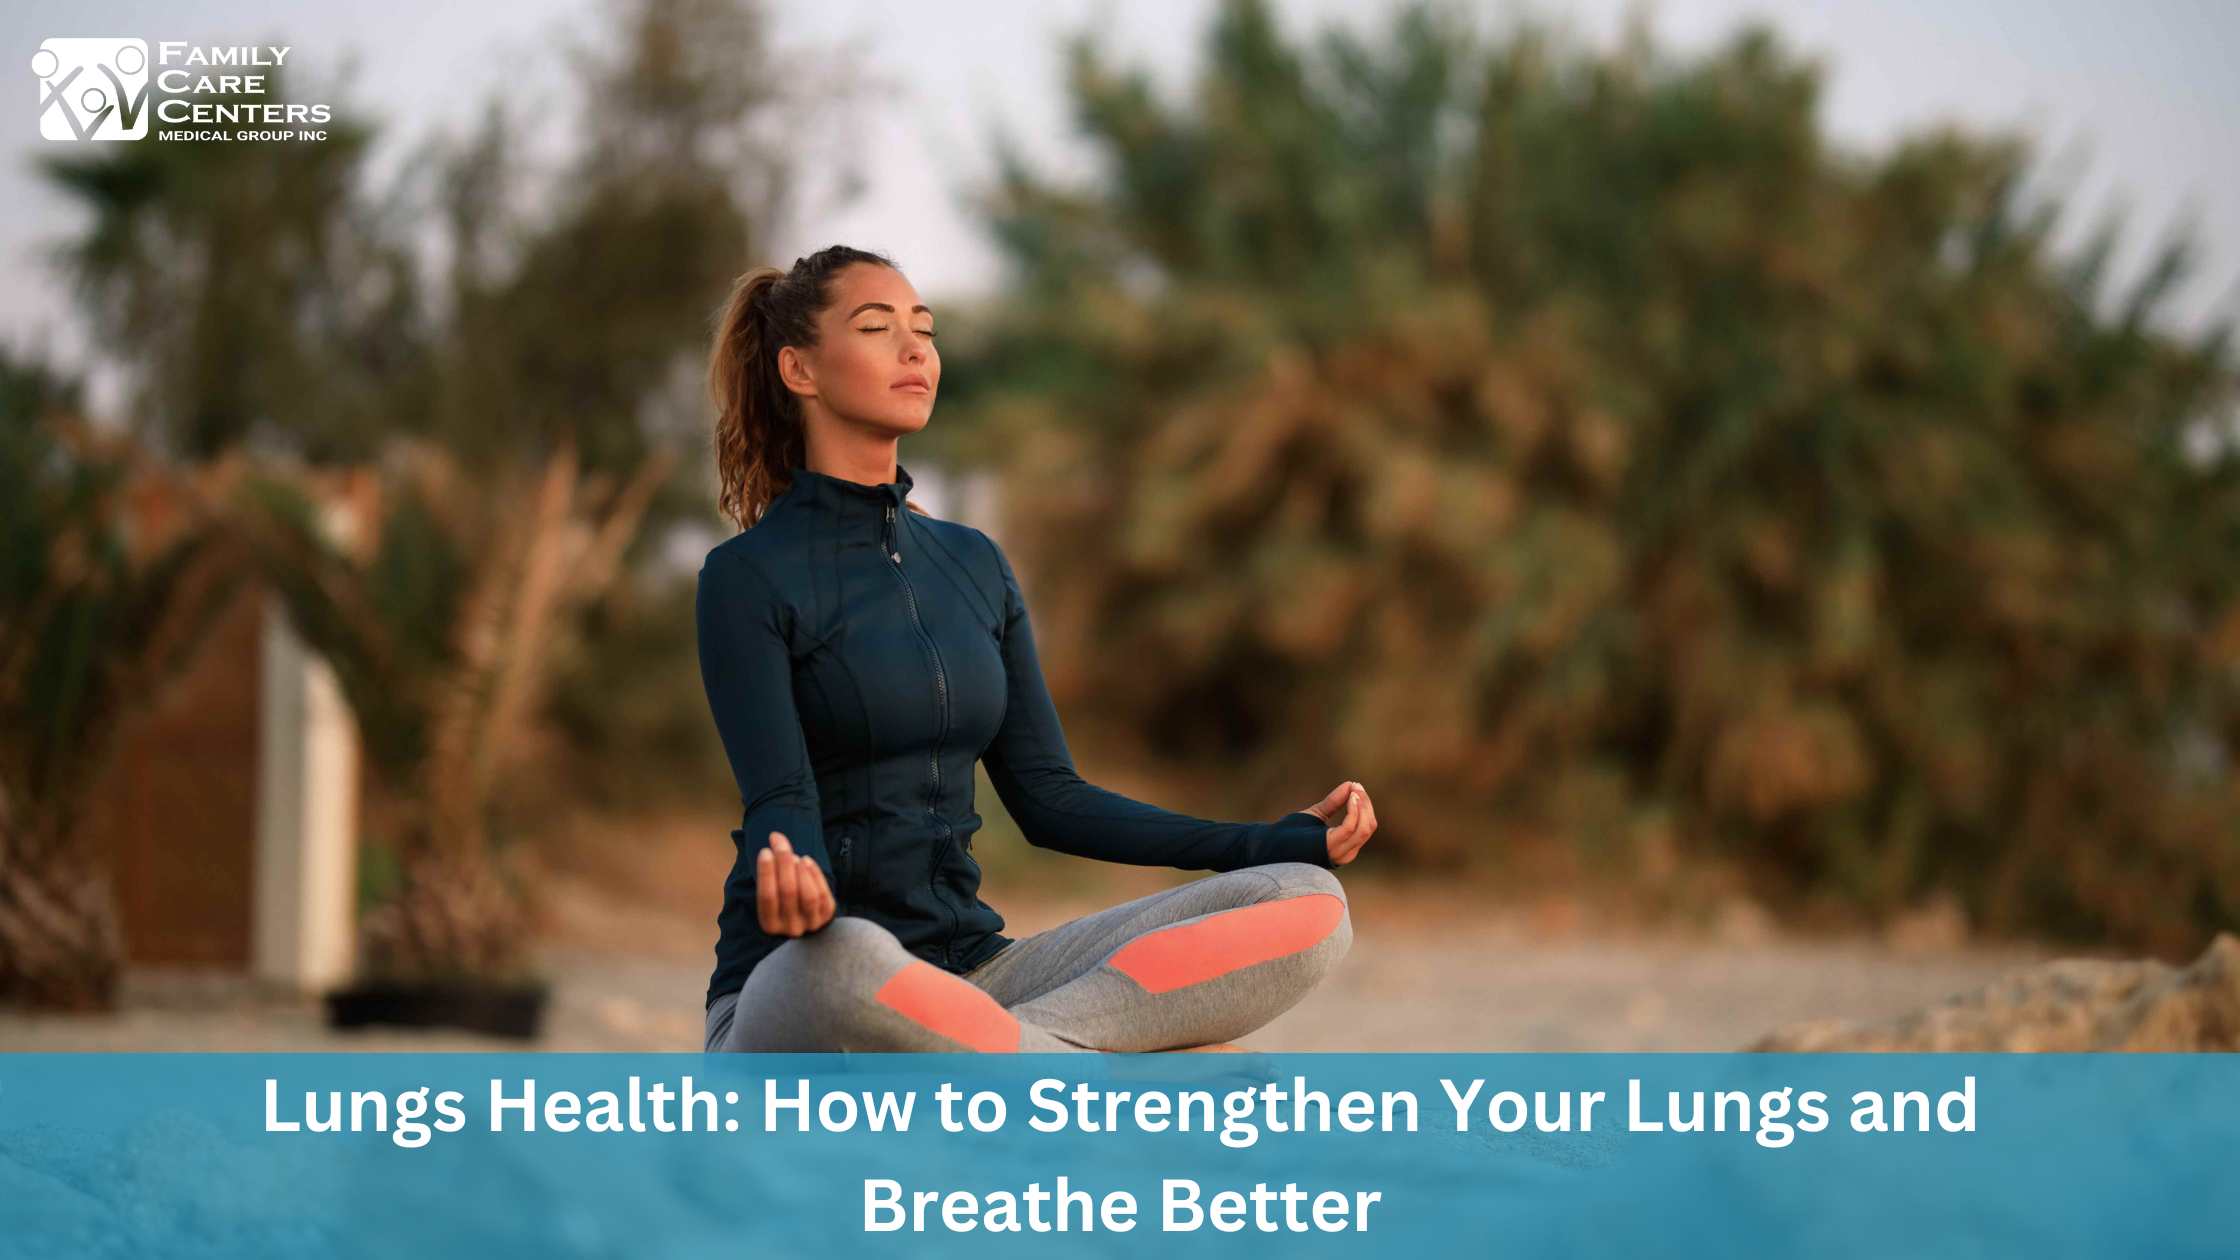 🌬️ Practice Pursed-Lip Breathing for Enhanced Wellness and Focus. |  Anahana posted on the topic | LinkedIn